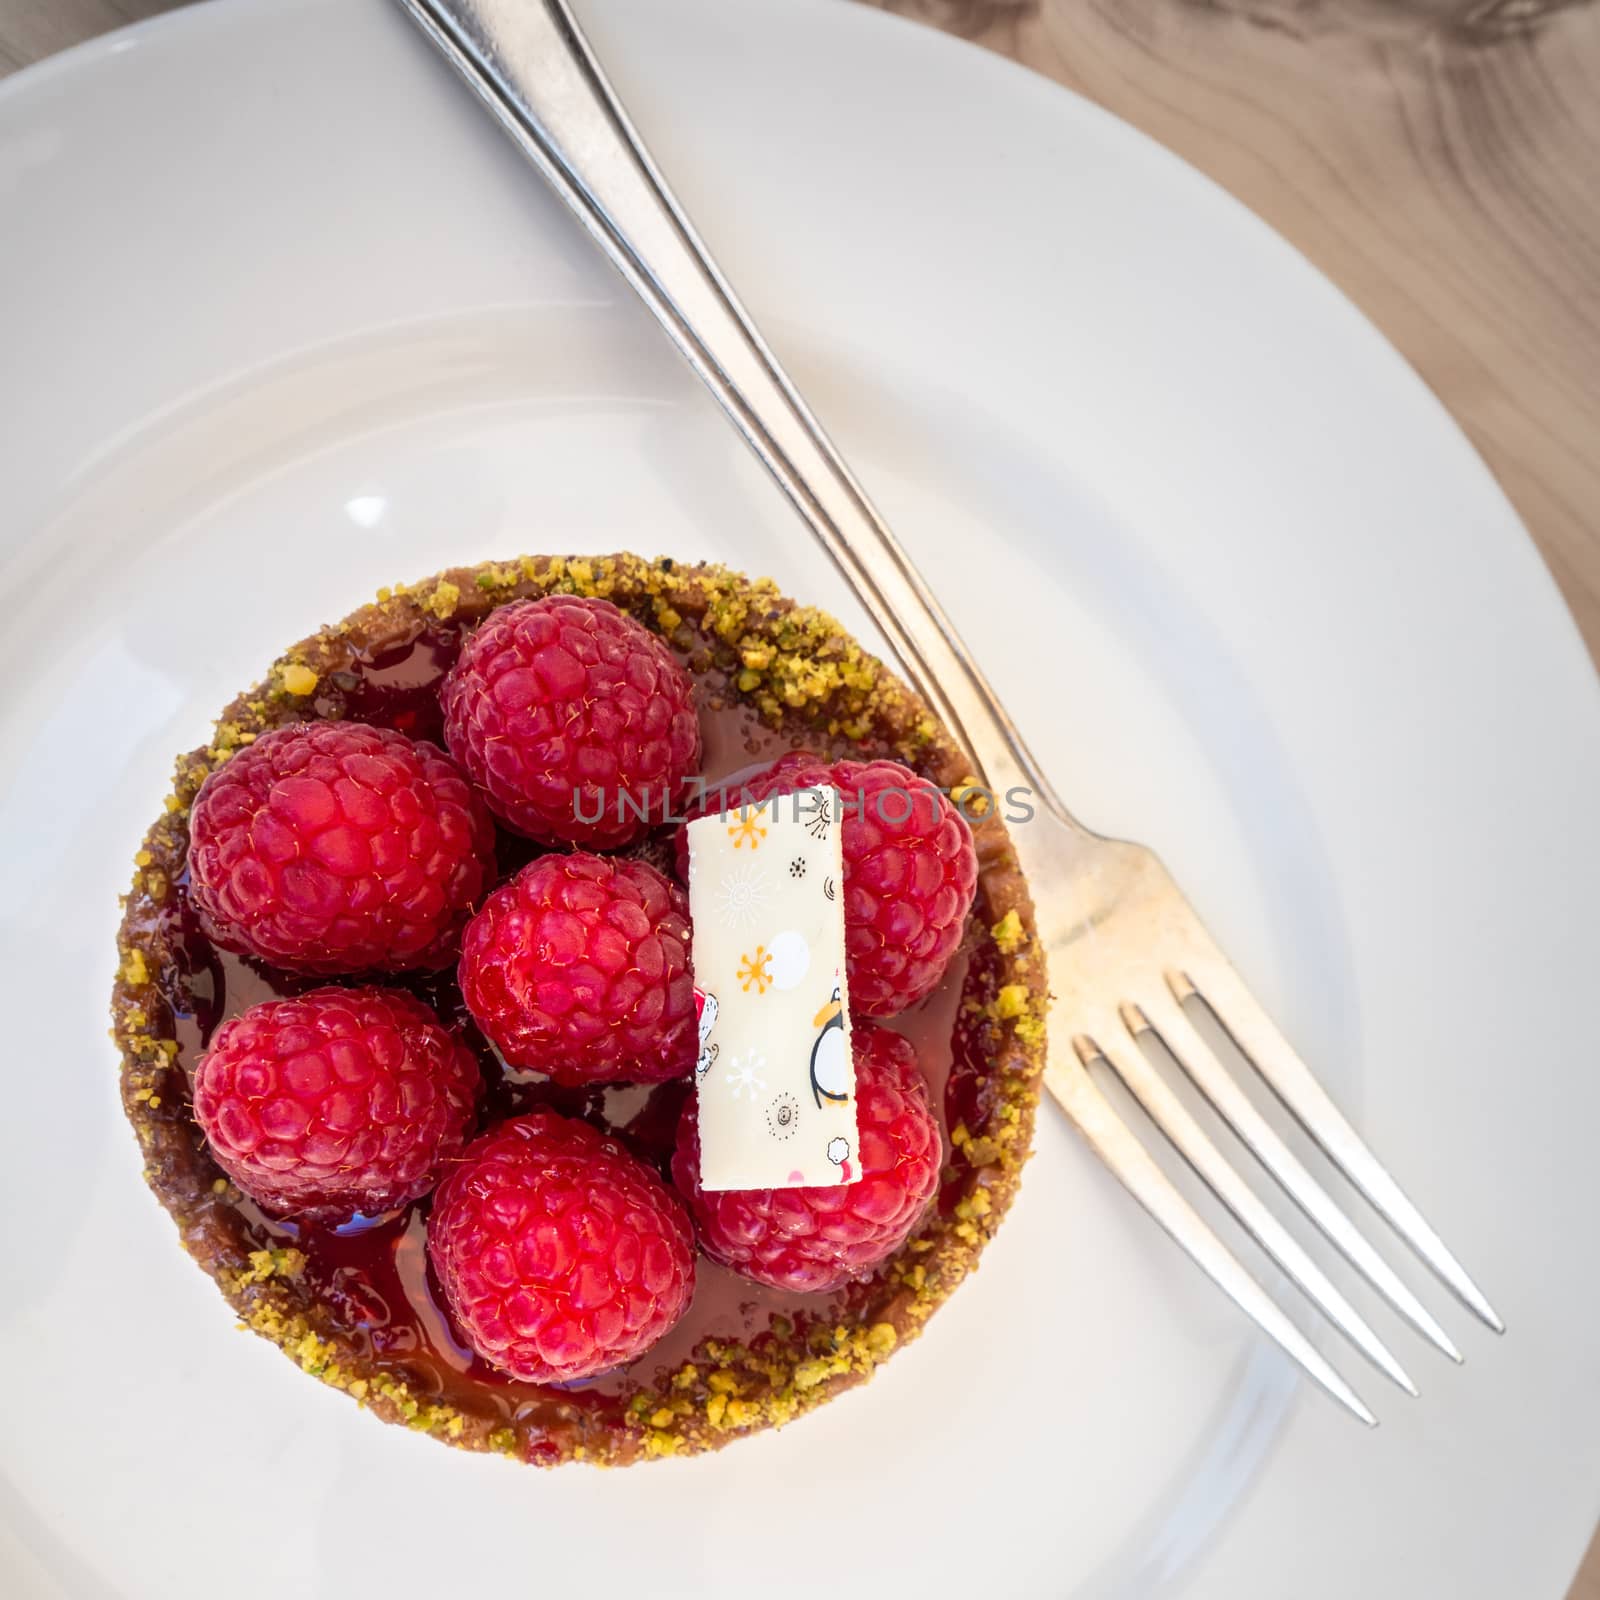 An image of a sweet raspberry tart with fork